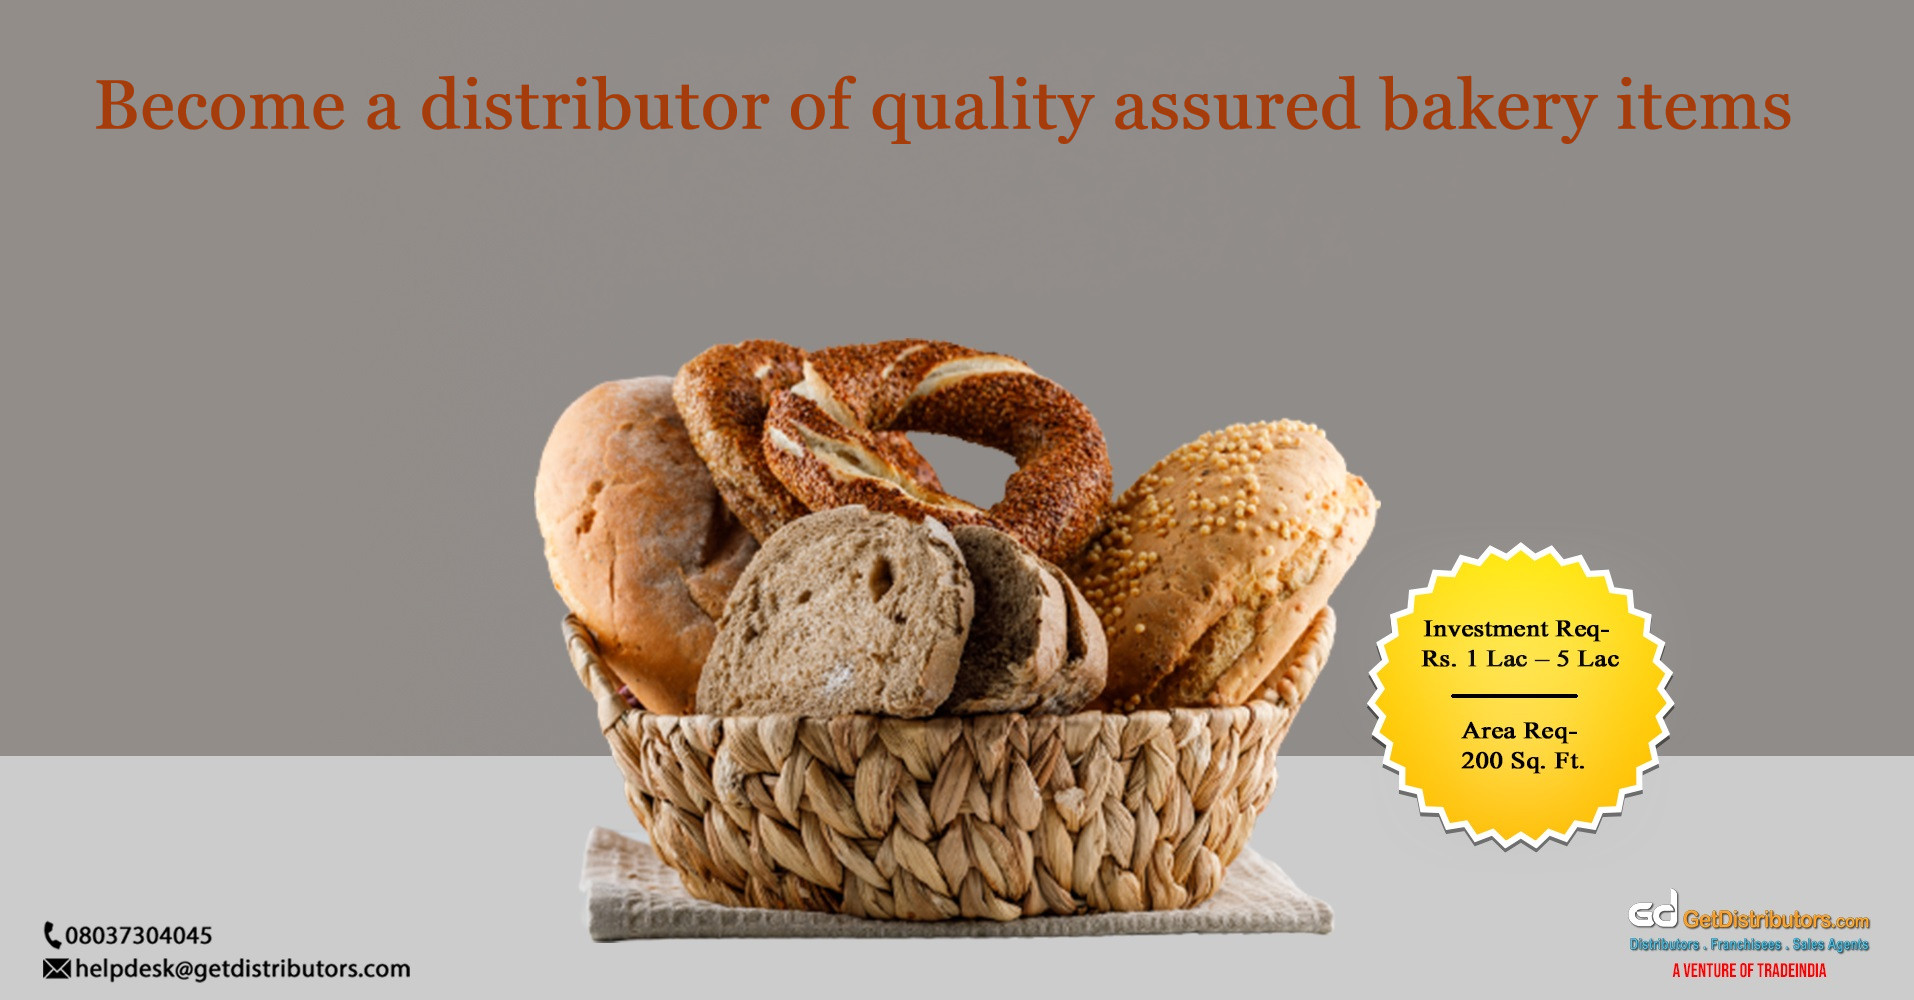 Become a distributor of quality assured bakery items